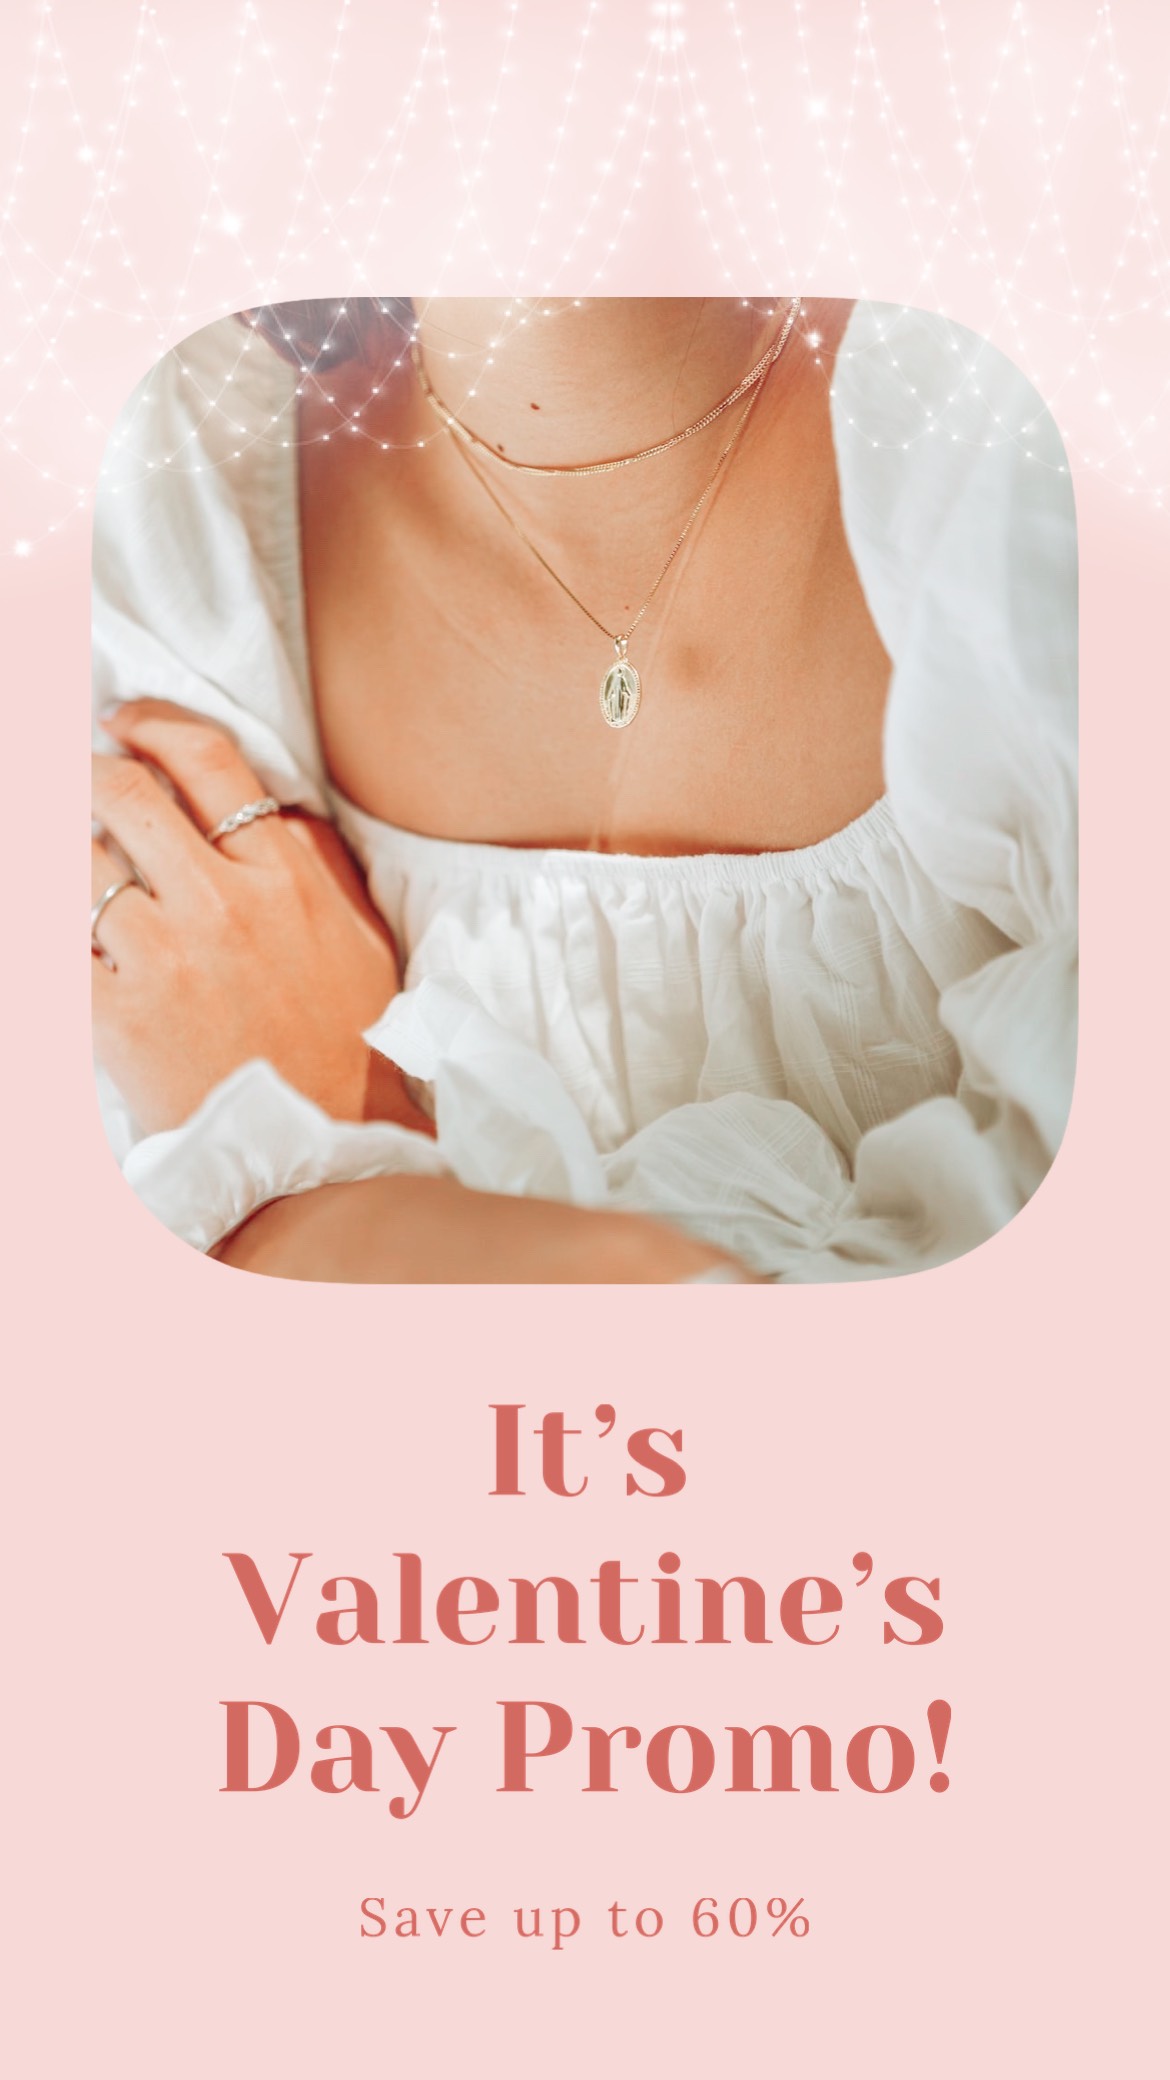 A Woman Wearing A White Shirt And A Necklace Love Story Template